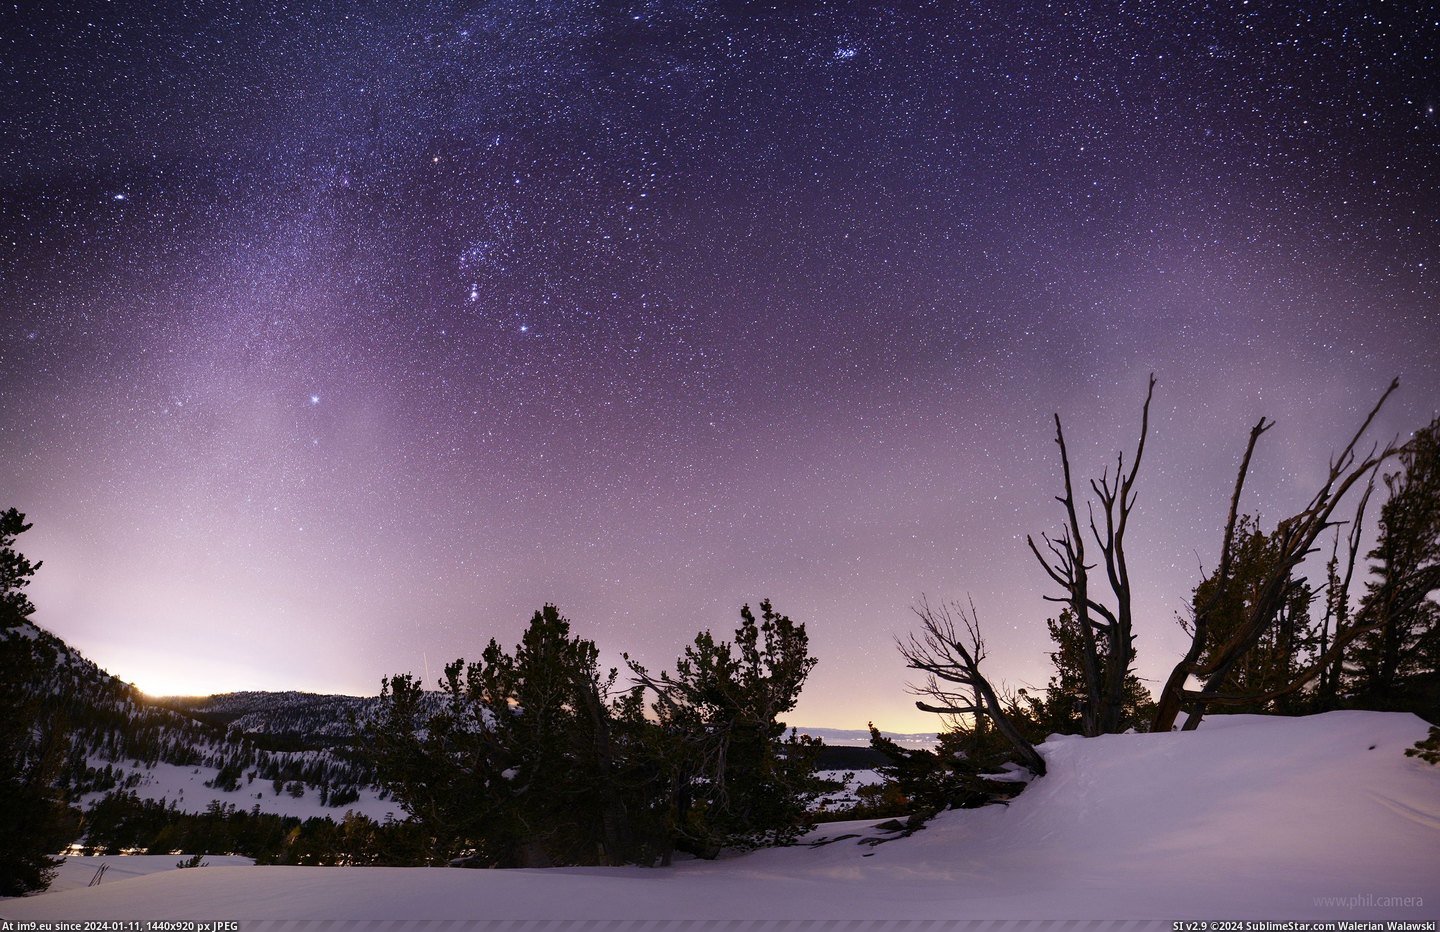 #Nature #Photo #Wallpaper #Night #Lake #Left #Winter #Rose #Sky #Stars [Earthporn] Winter Night Sky over The Mt Rose - Sheep Flat meadow last night, with Carson down to the left and Lake Tahoe peakin Pic. (Image of album My r/EARTHPORN favs))